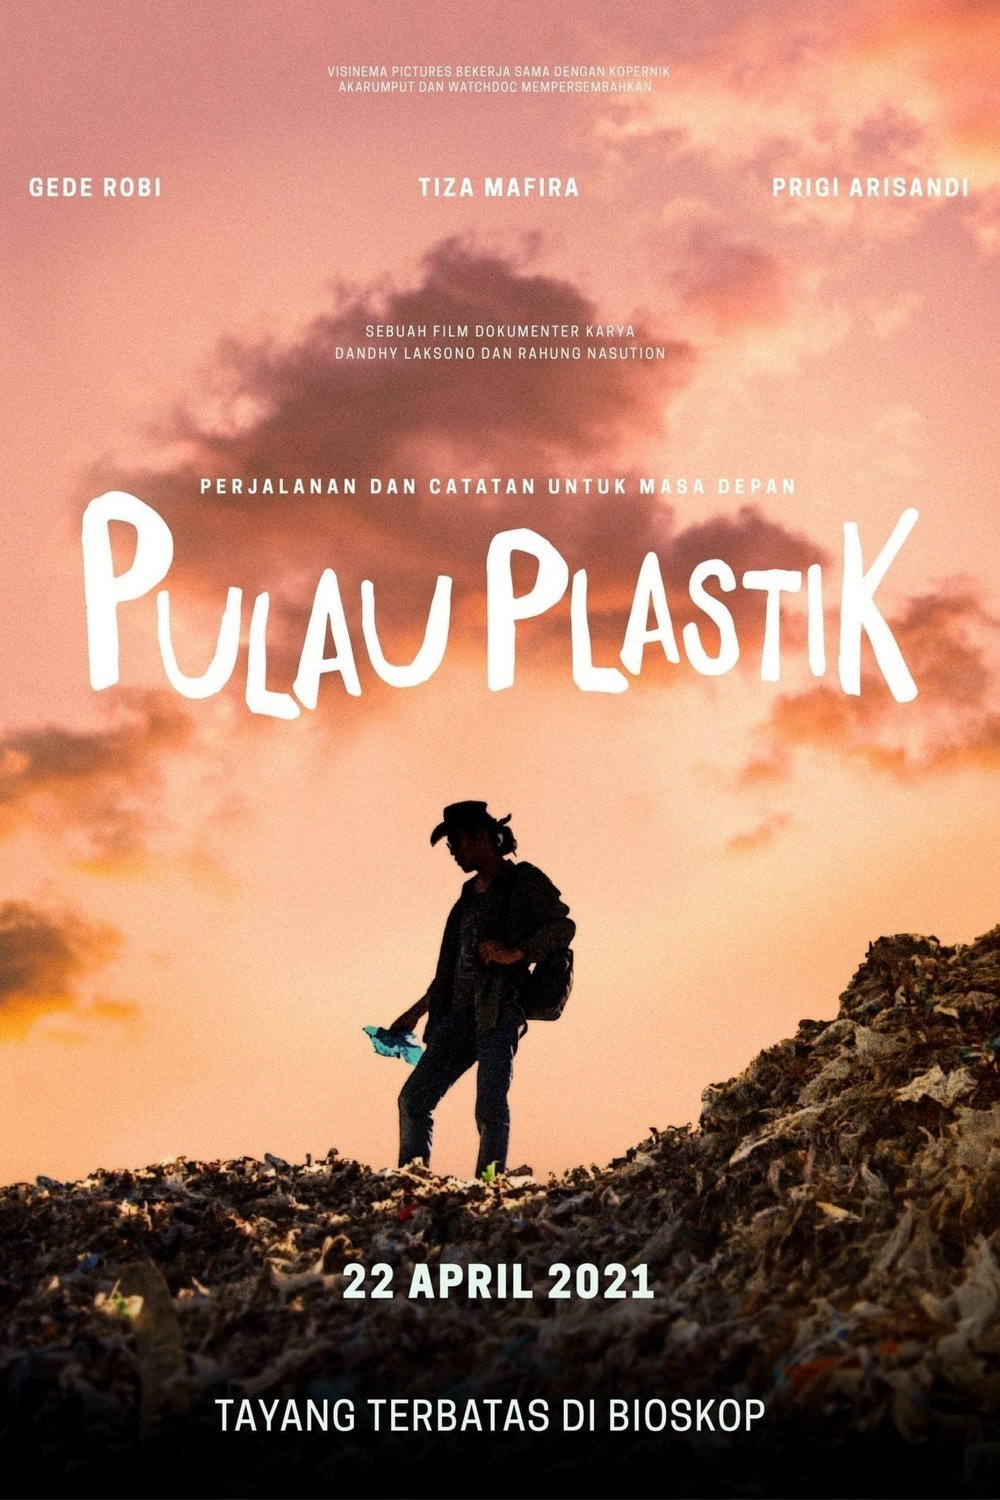 Indonesian poster of the movie Plastic Island